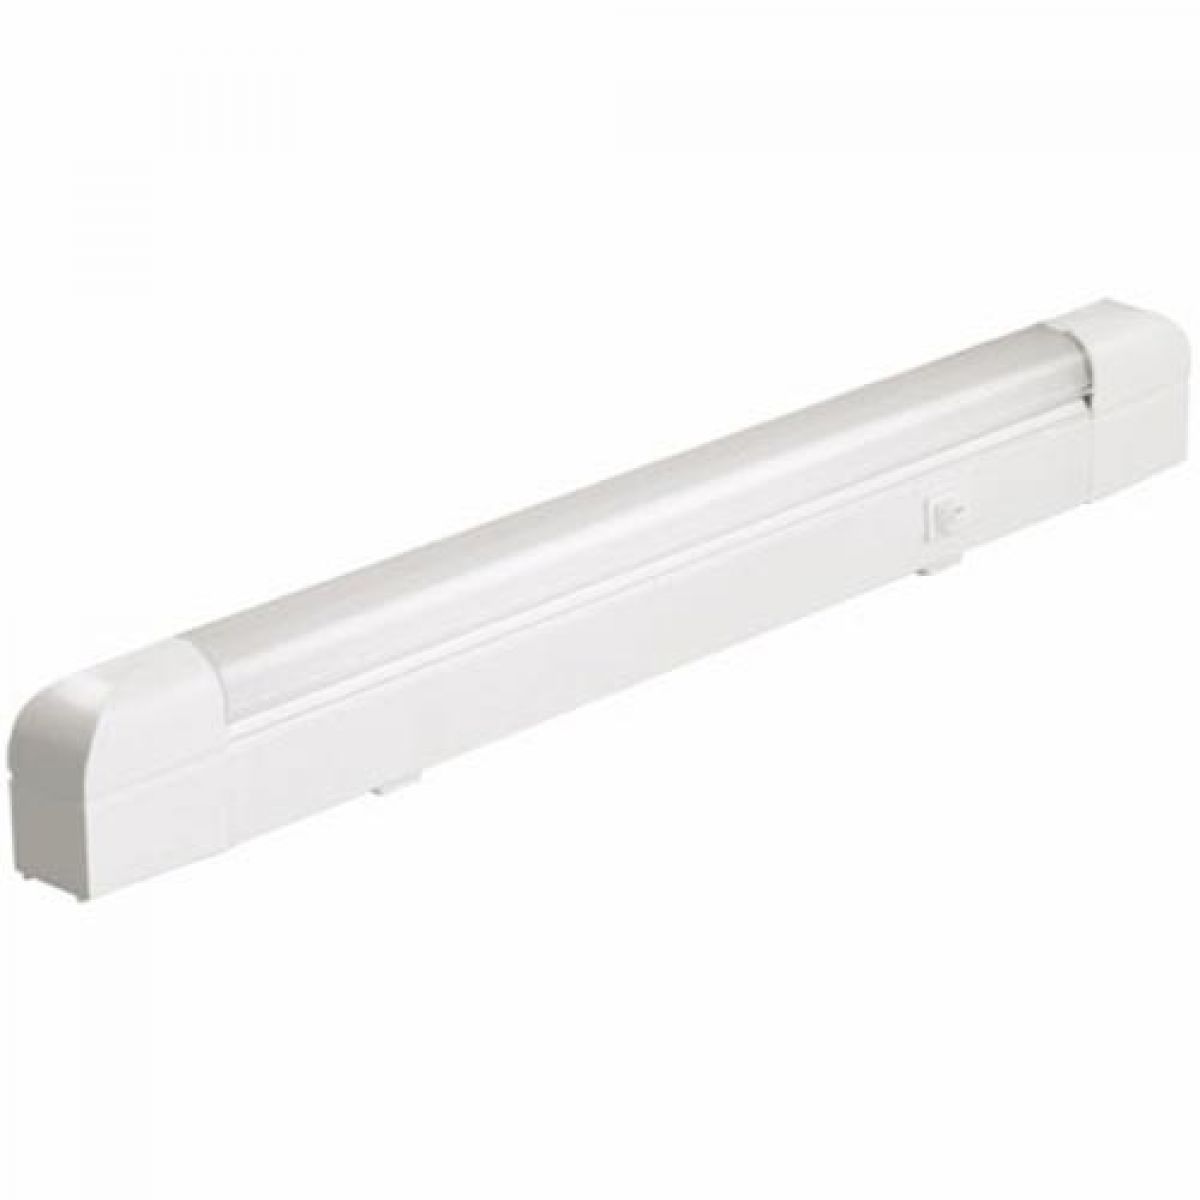 Luminaire with fluorescent lamp and switch LPO 3011 4000K